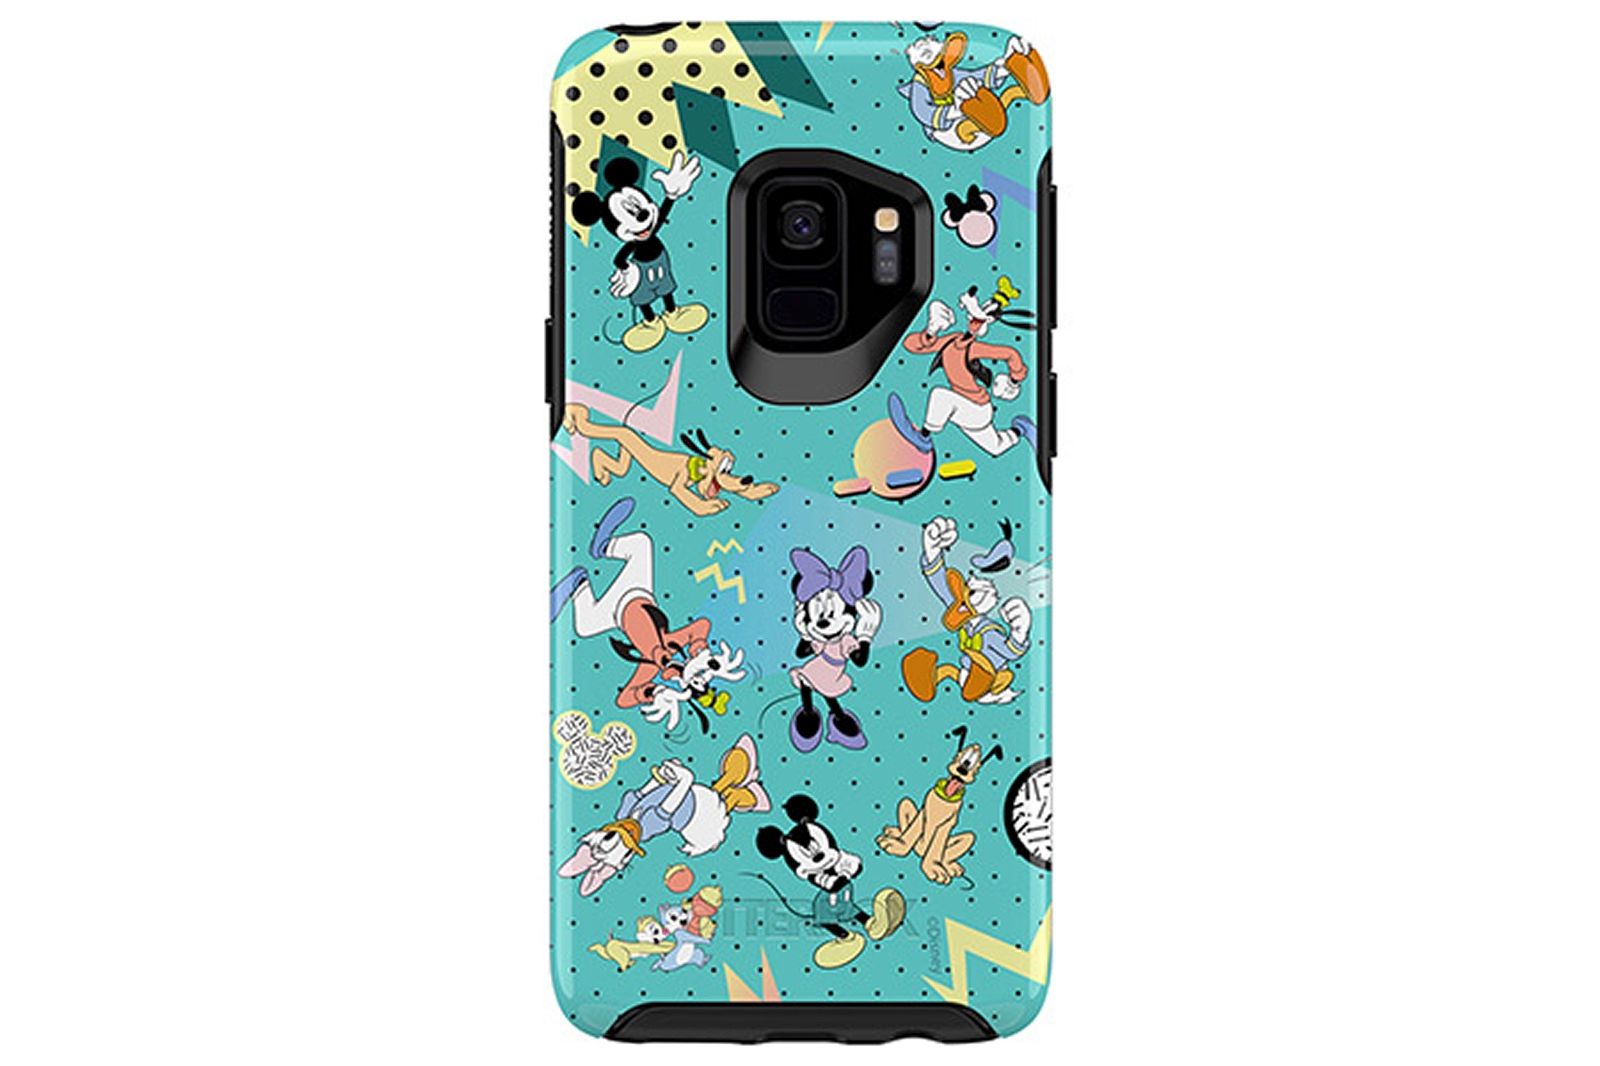 Best Disney Otterbox cases Protection fit for a Princess or a mouse image 6